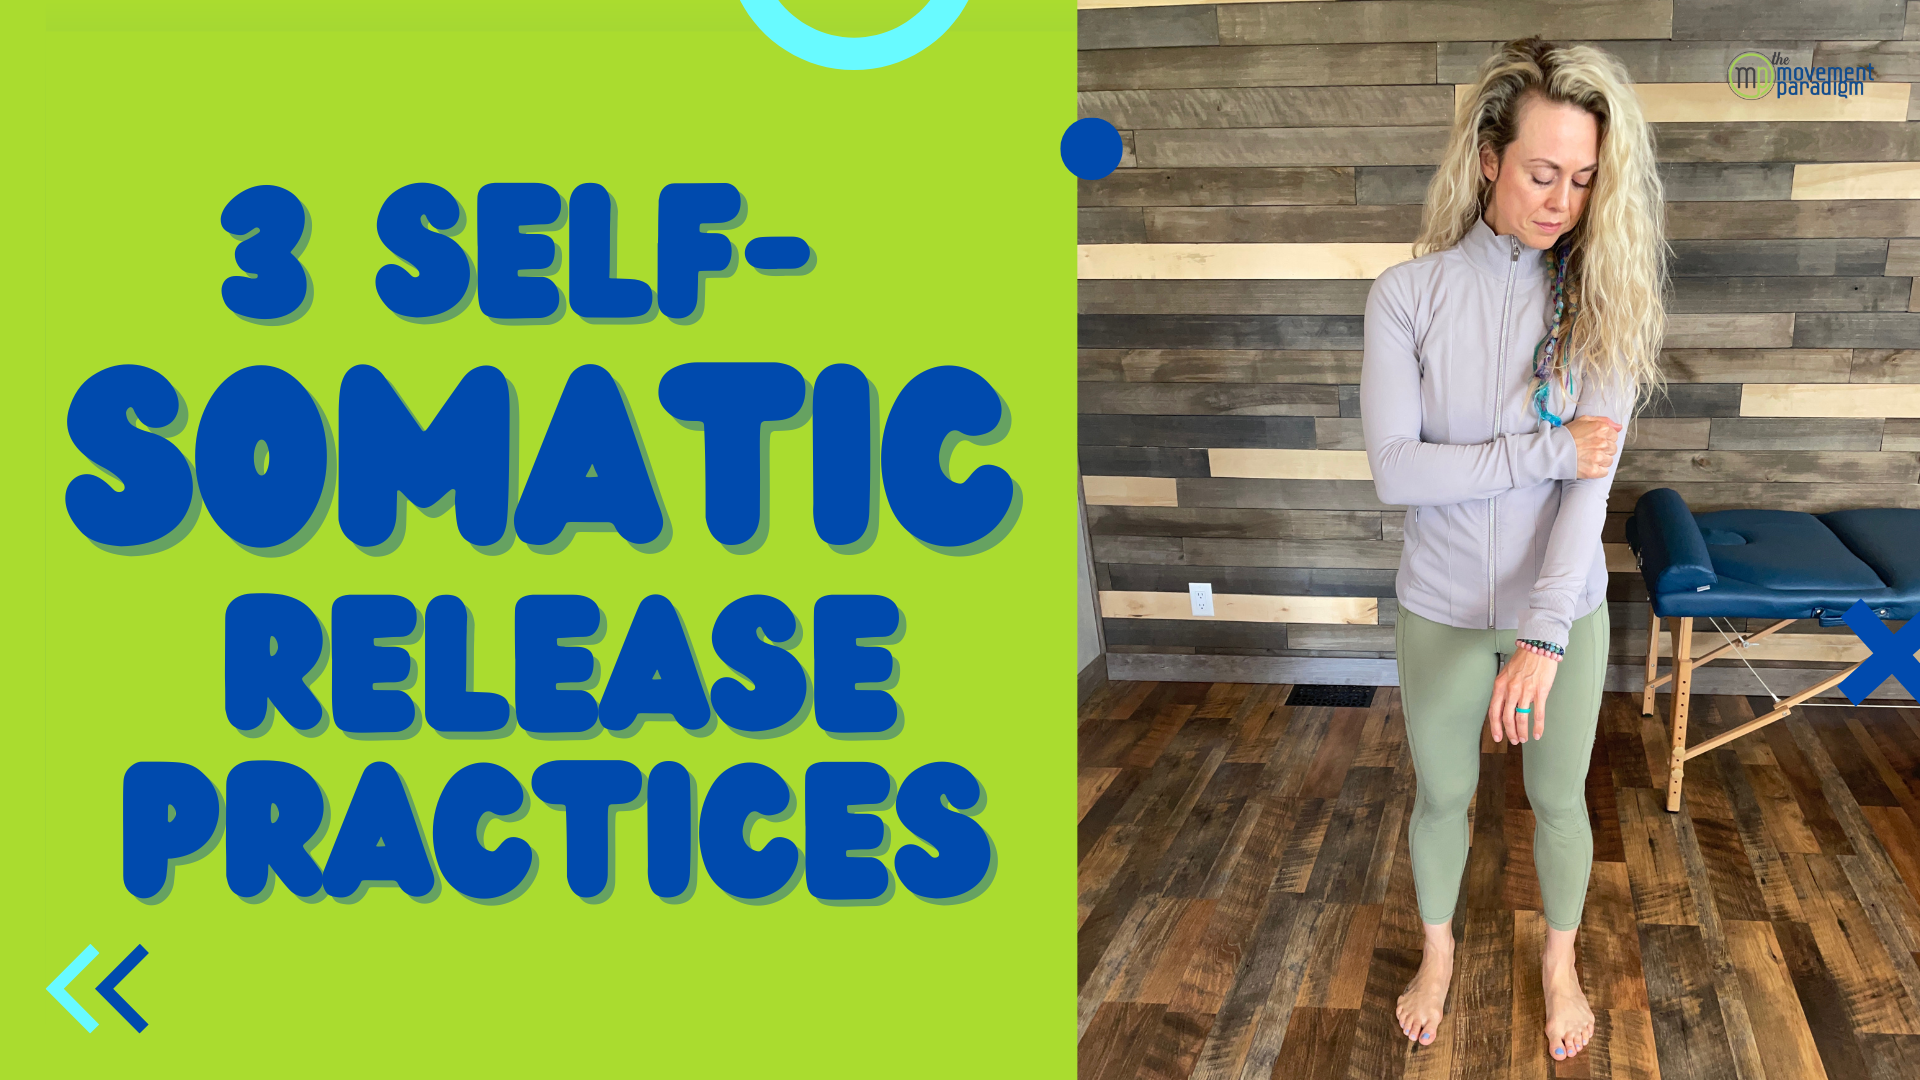 3 self-somatic release practices